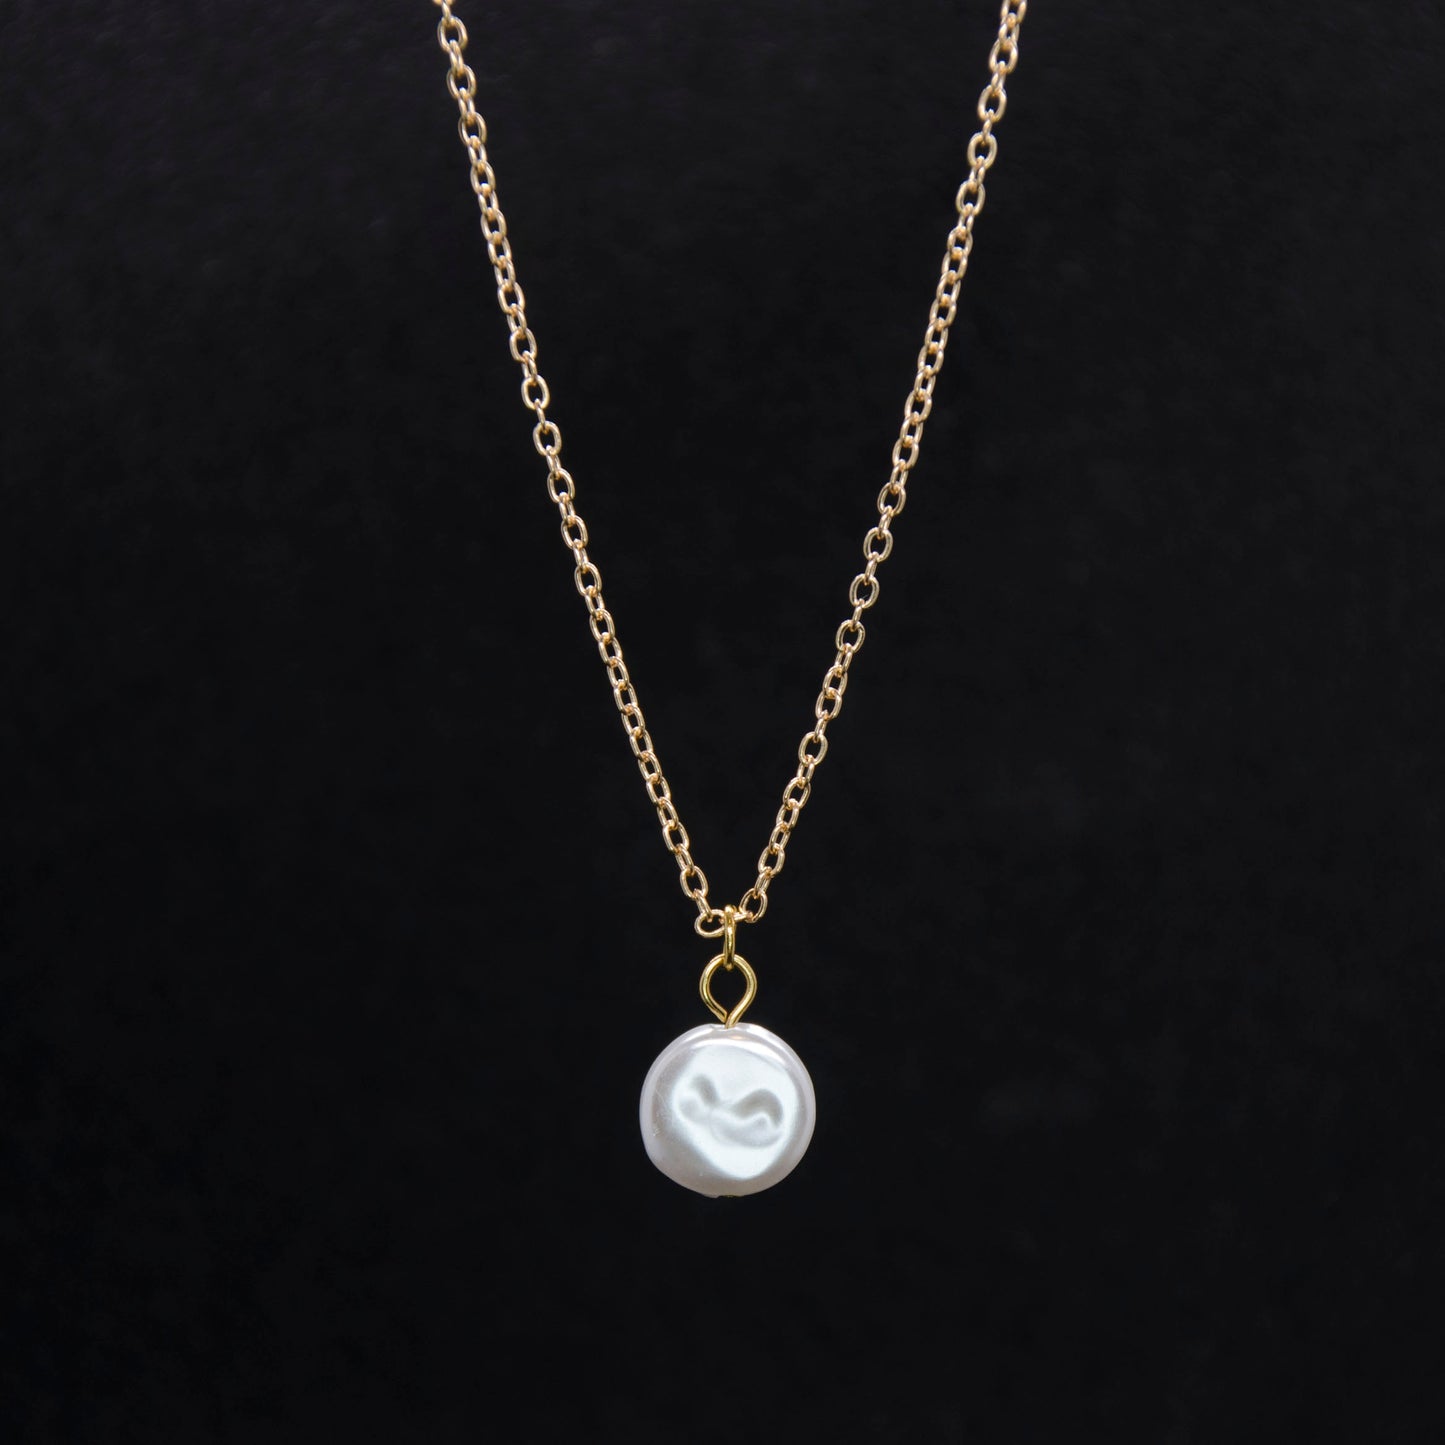 Femininity x Intuition • Necklace • Pearl & Stainless Steel